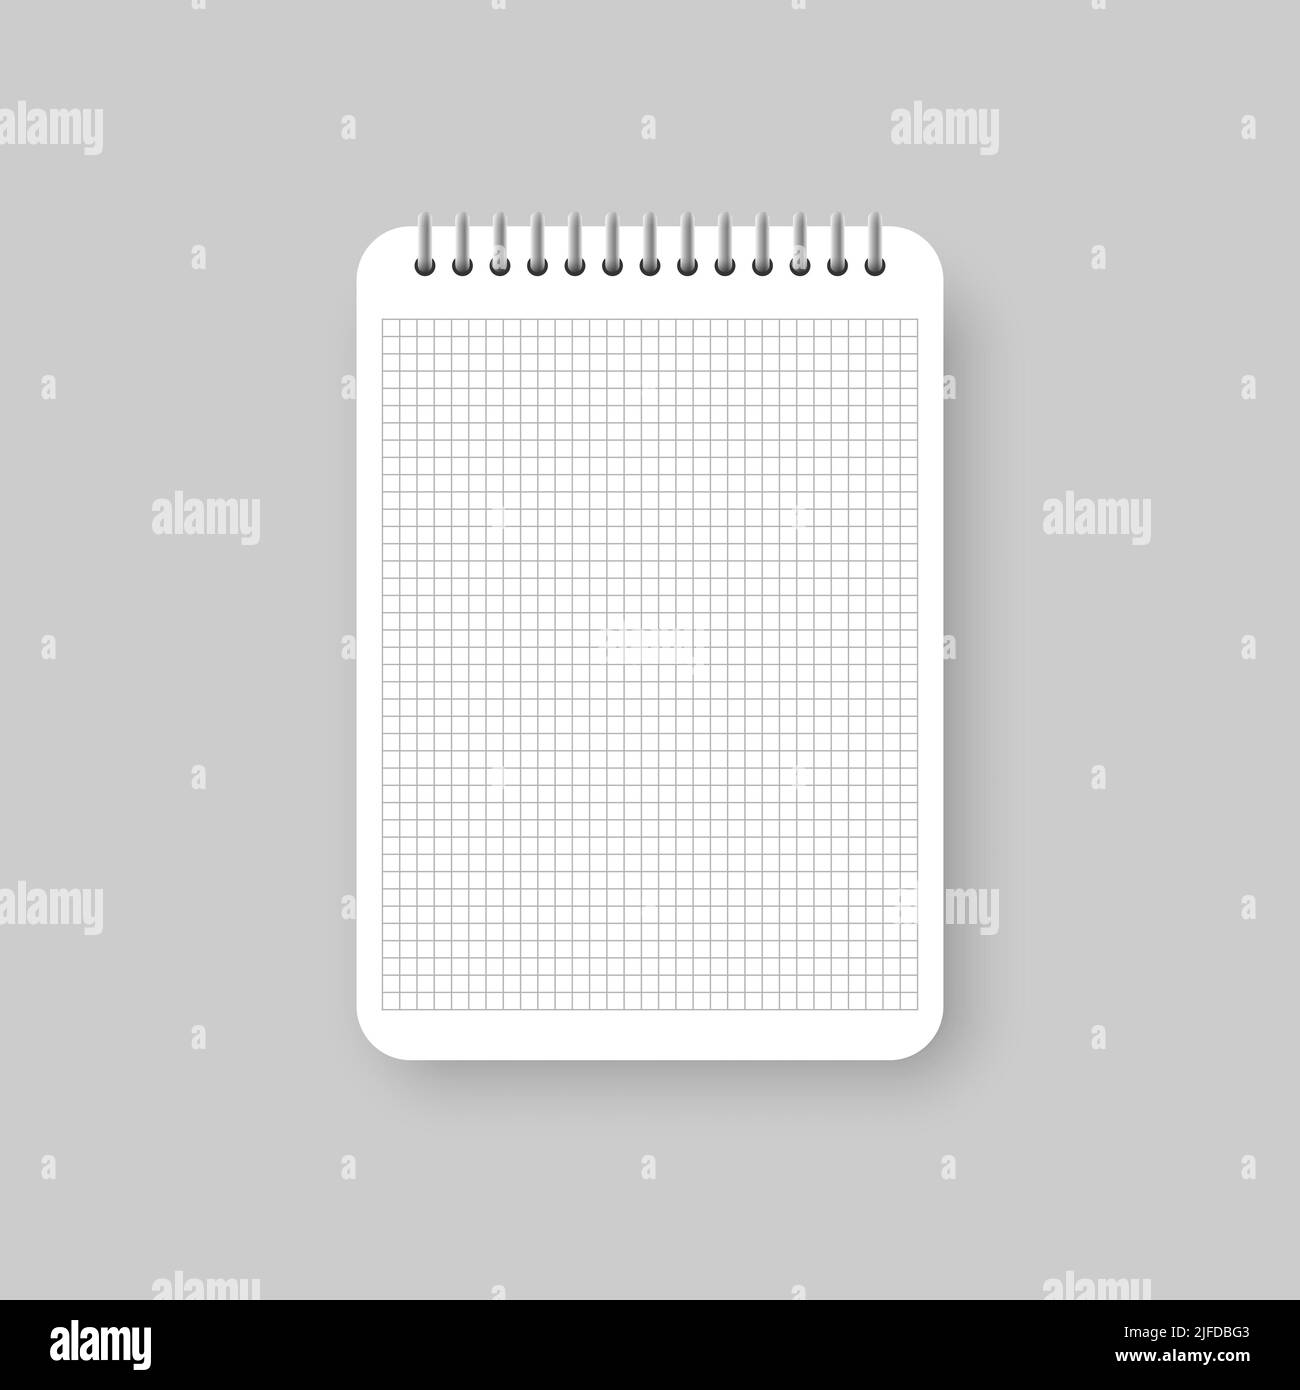 White A4 paper sheet with with linear pattern on transparent background.  Vector. Stock Vector